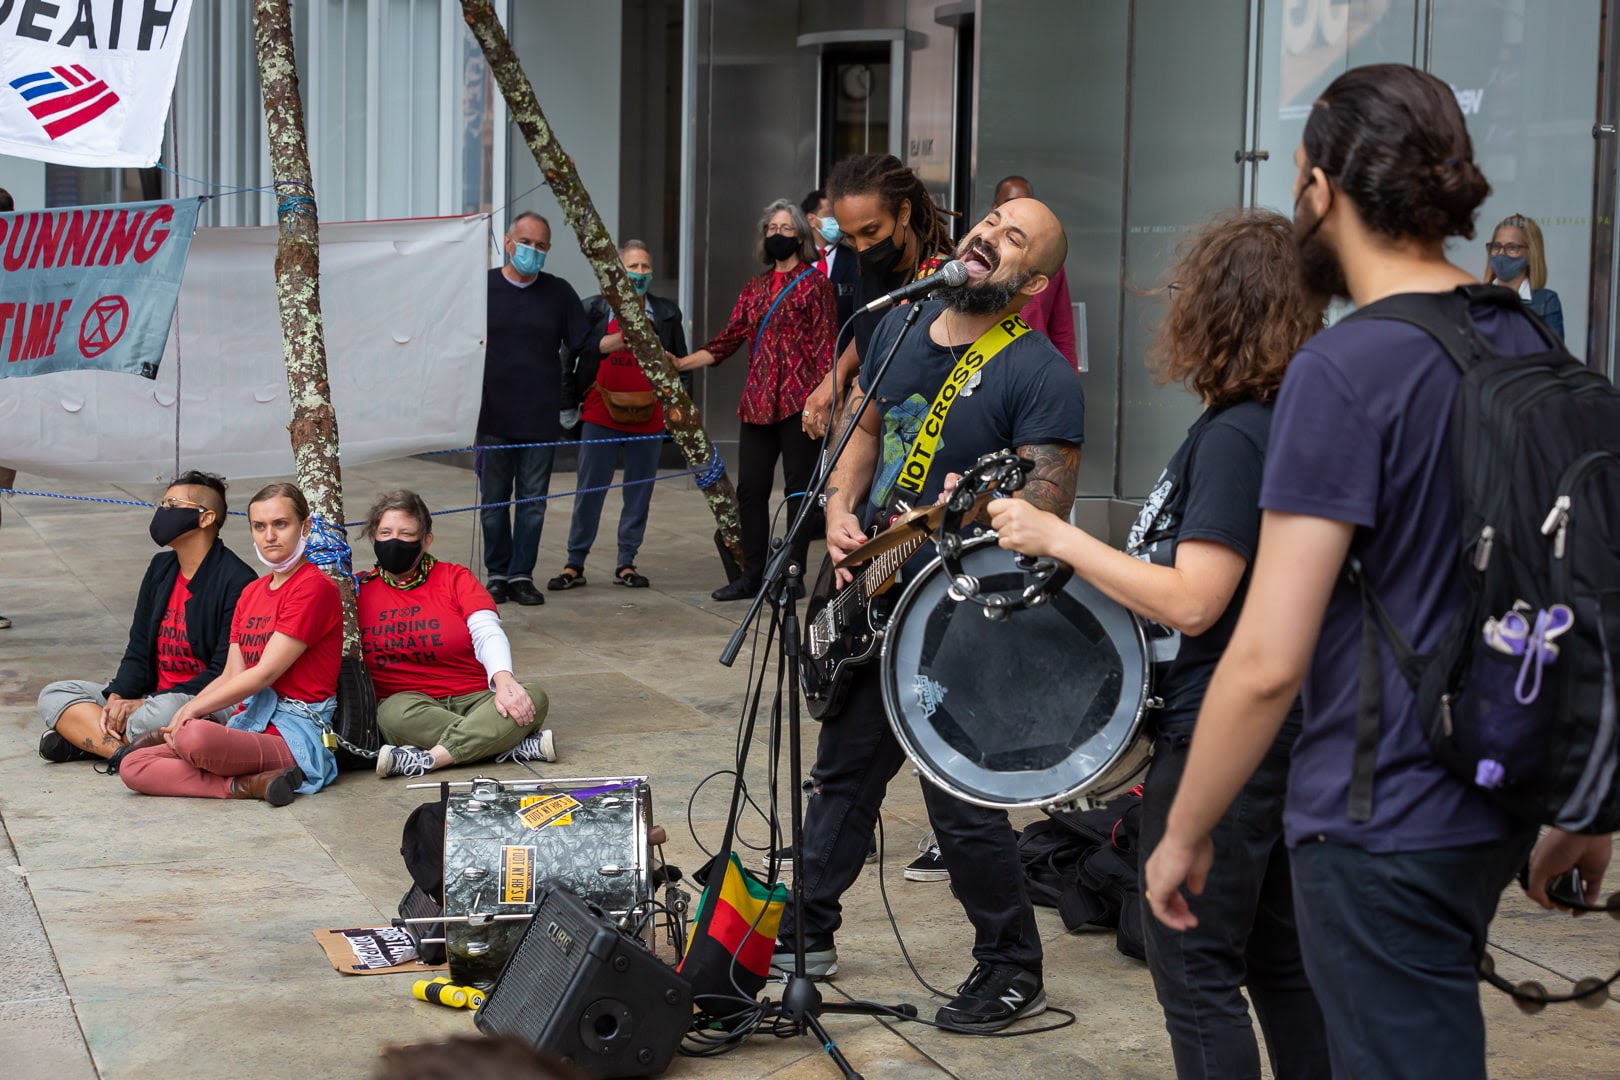 A rock band perform next to a tripod set-up in the forecourt of a skyscraper.